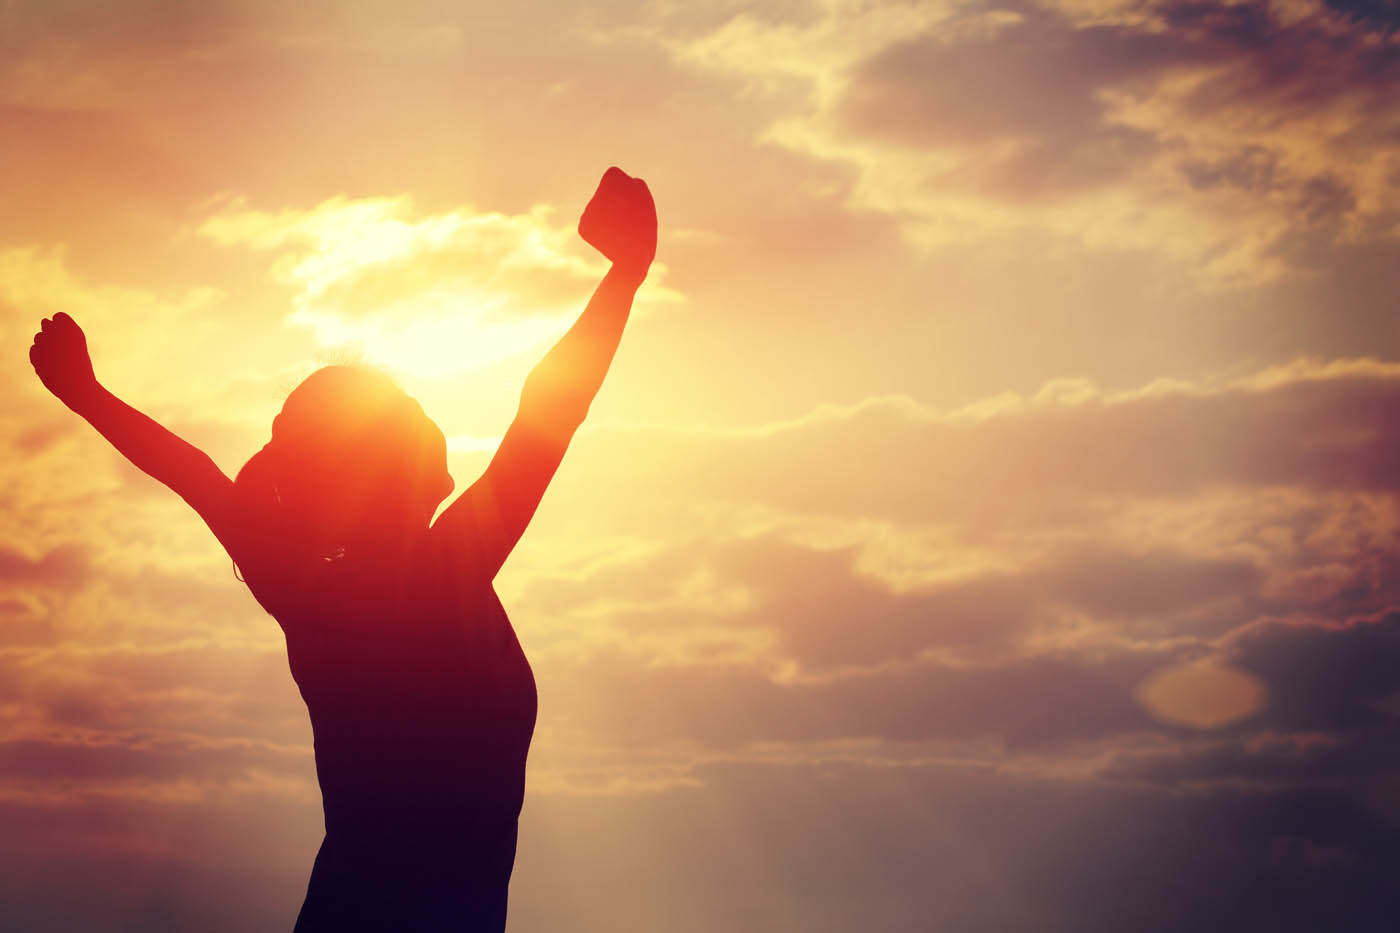 A woman standing in the light with her arms up in the air - learn how you can get relief with Light Lounge's back pain management in Evergreen, CO.